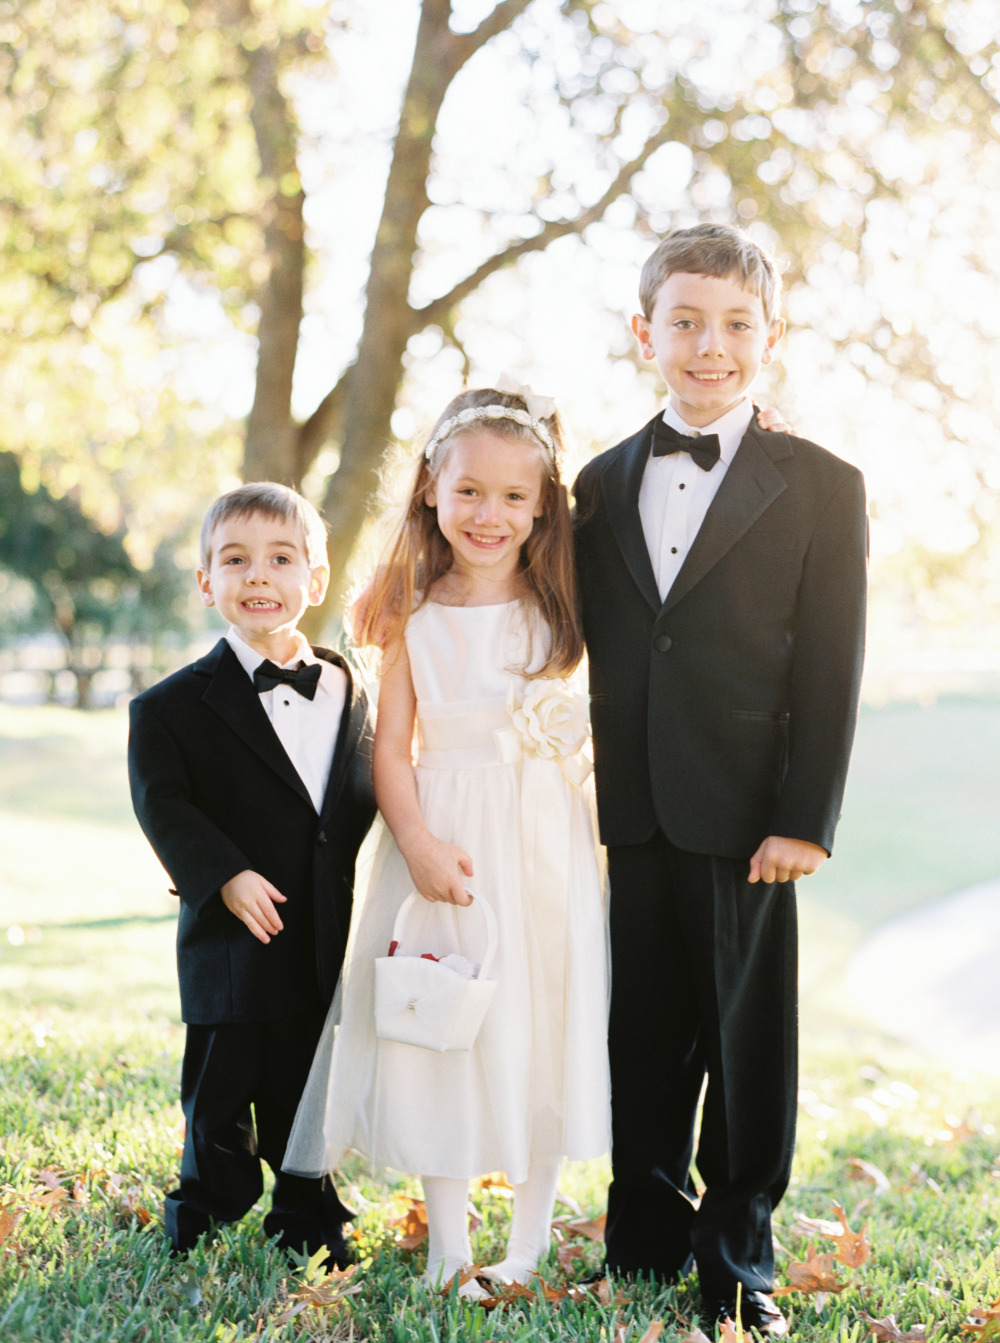 classic black and white flower girl and ring bearers